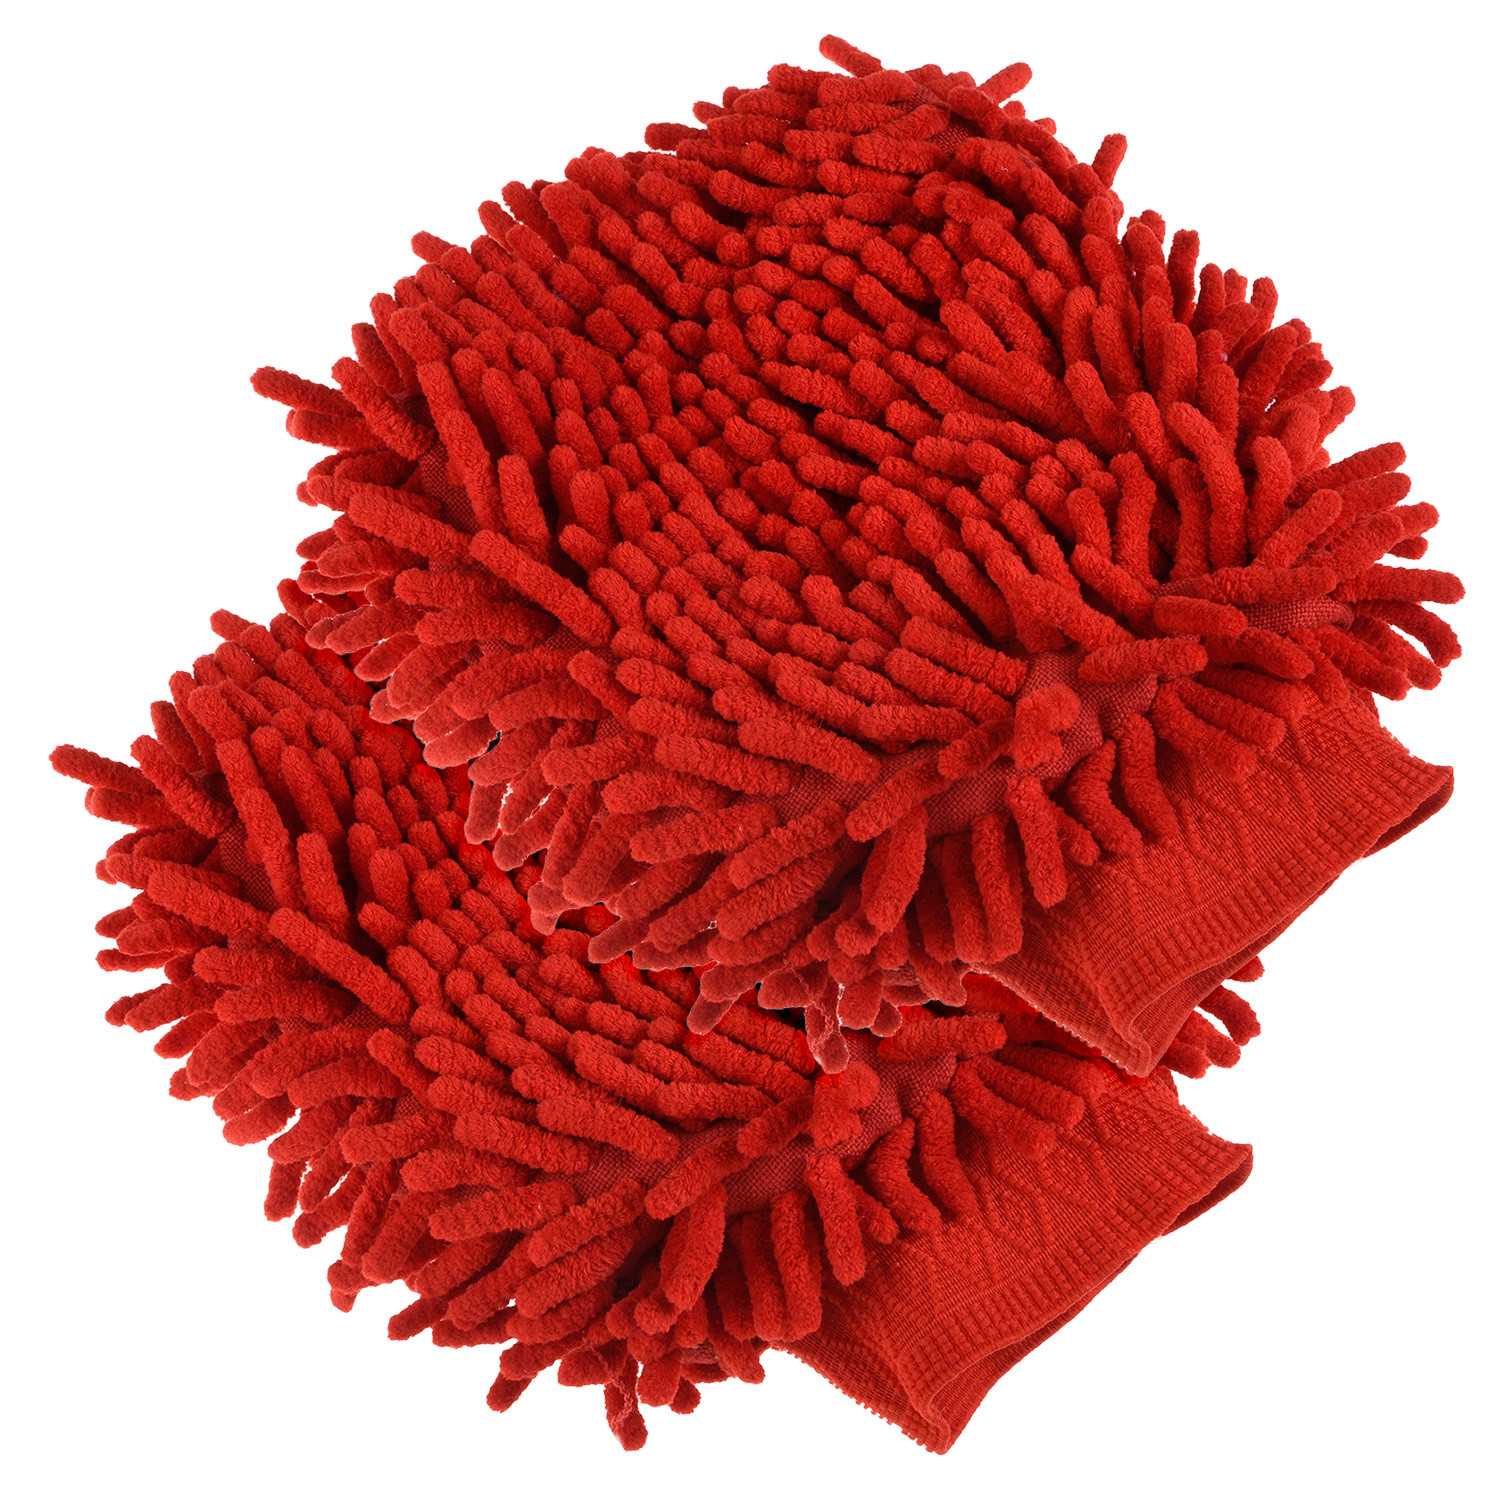 Kuber Industries Chenille Mitts|Microfiber Cleaning Gloves|Inside Waterproof Cloth Gloves|100 Gram Weighted Hand Duster|Hand Chenille Gloves For Car|Glass (Red)